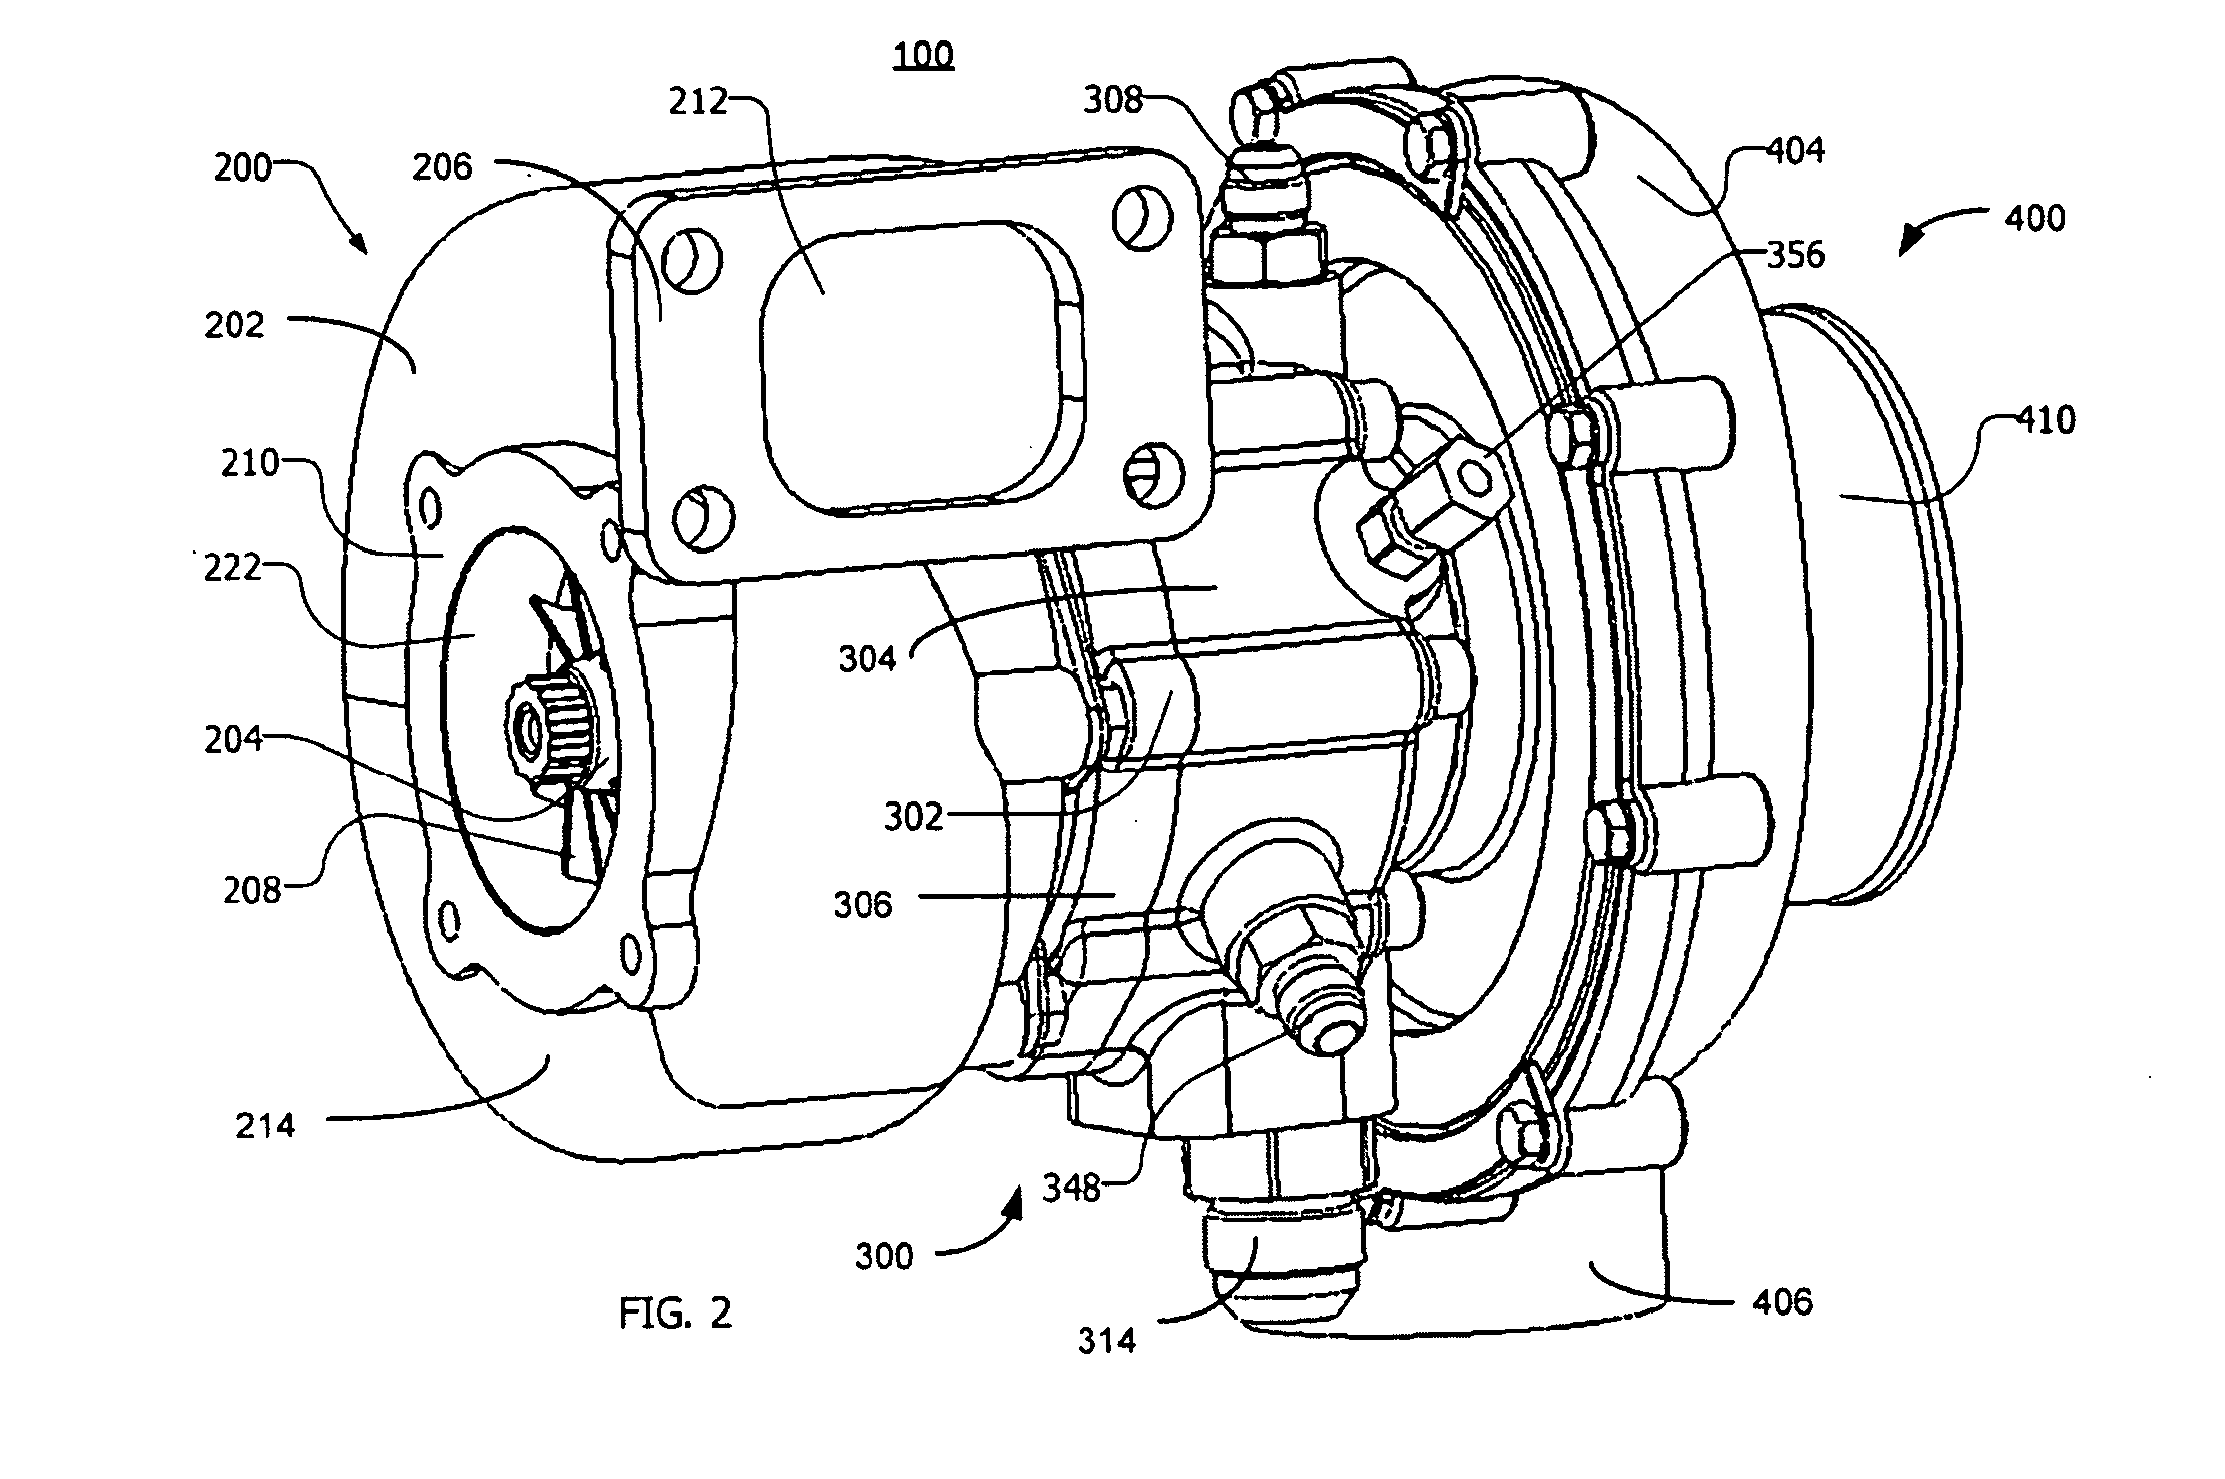 Cooling an Electrically Controlled Turbocharger